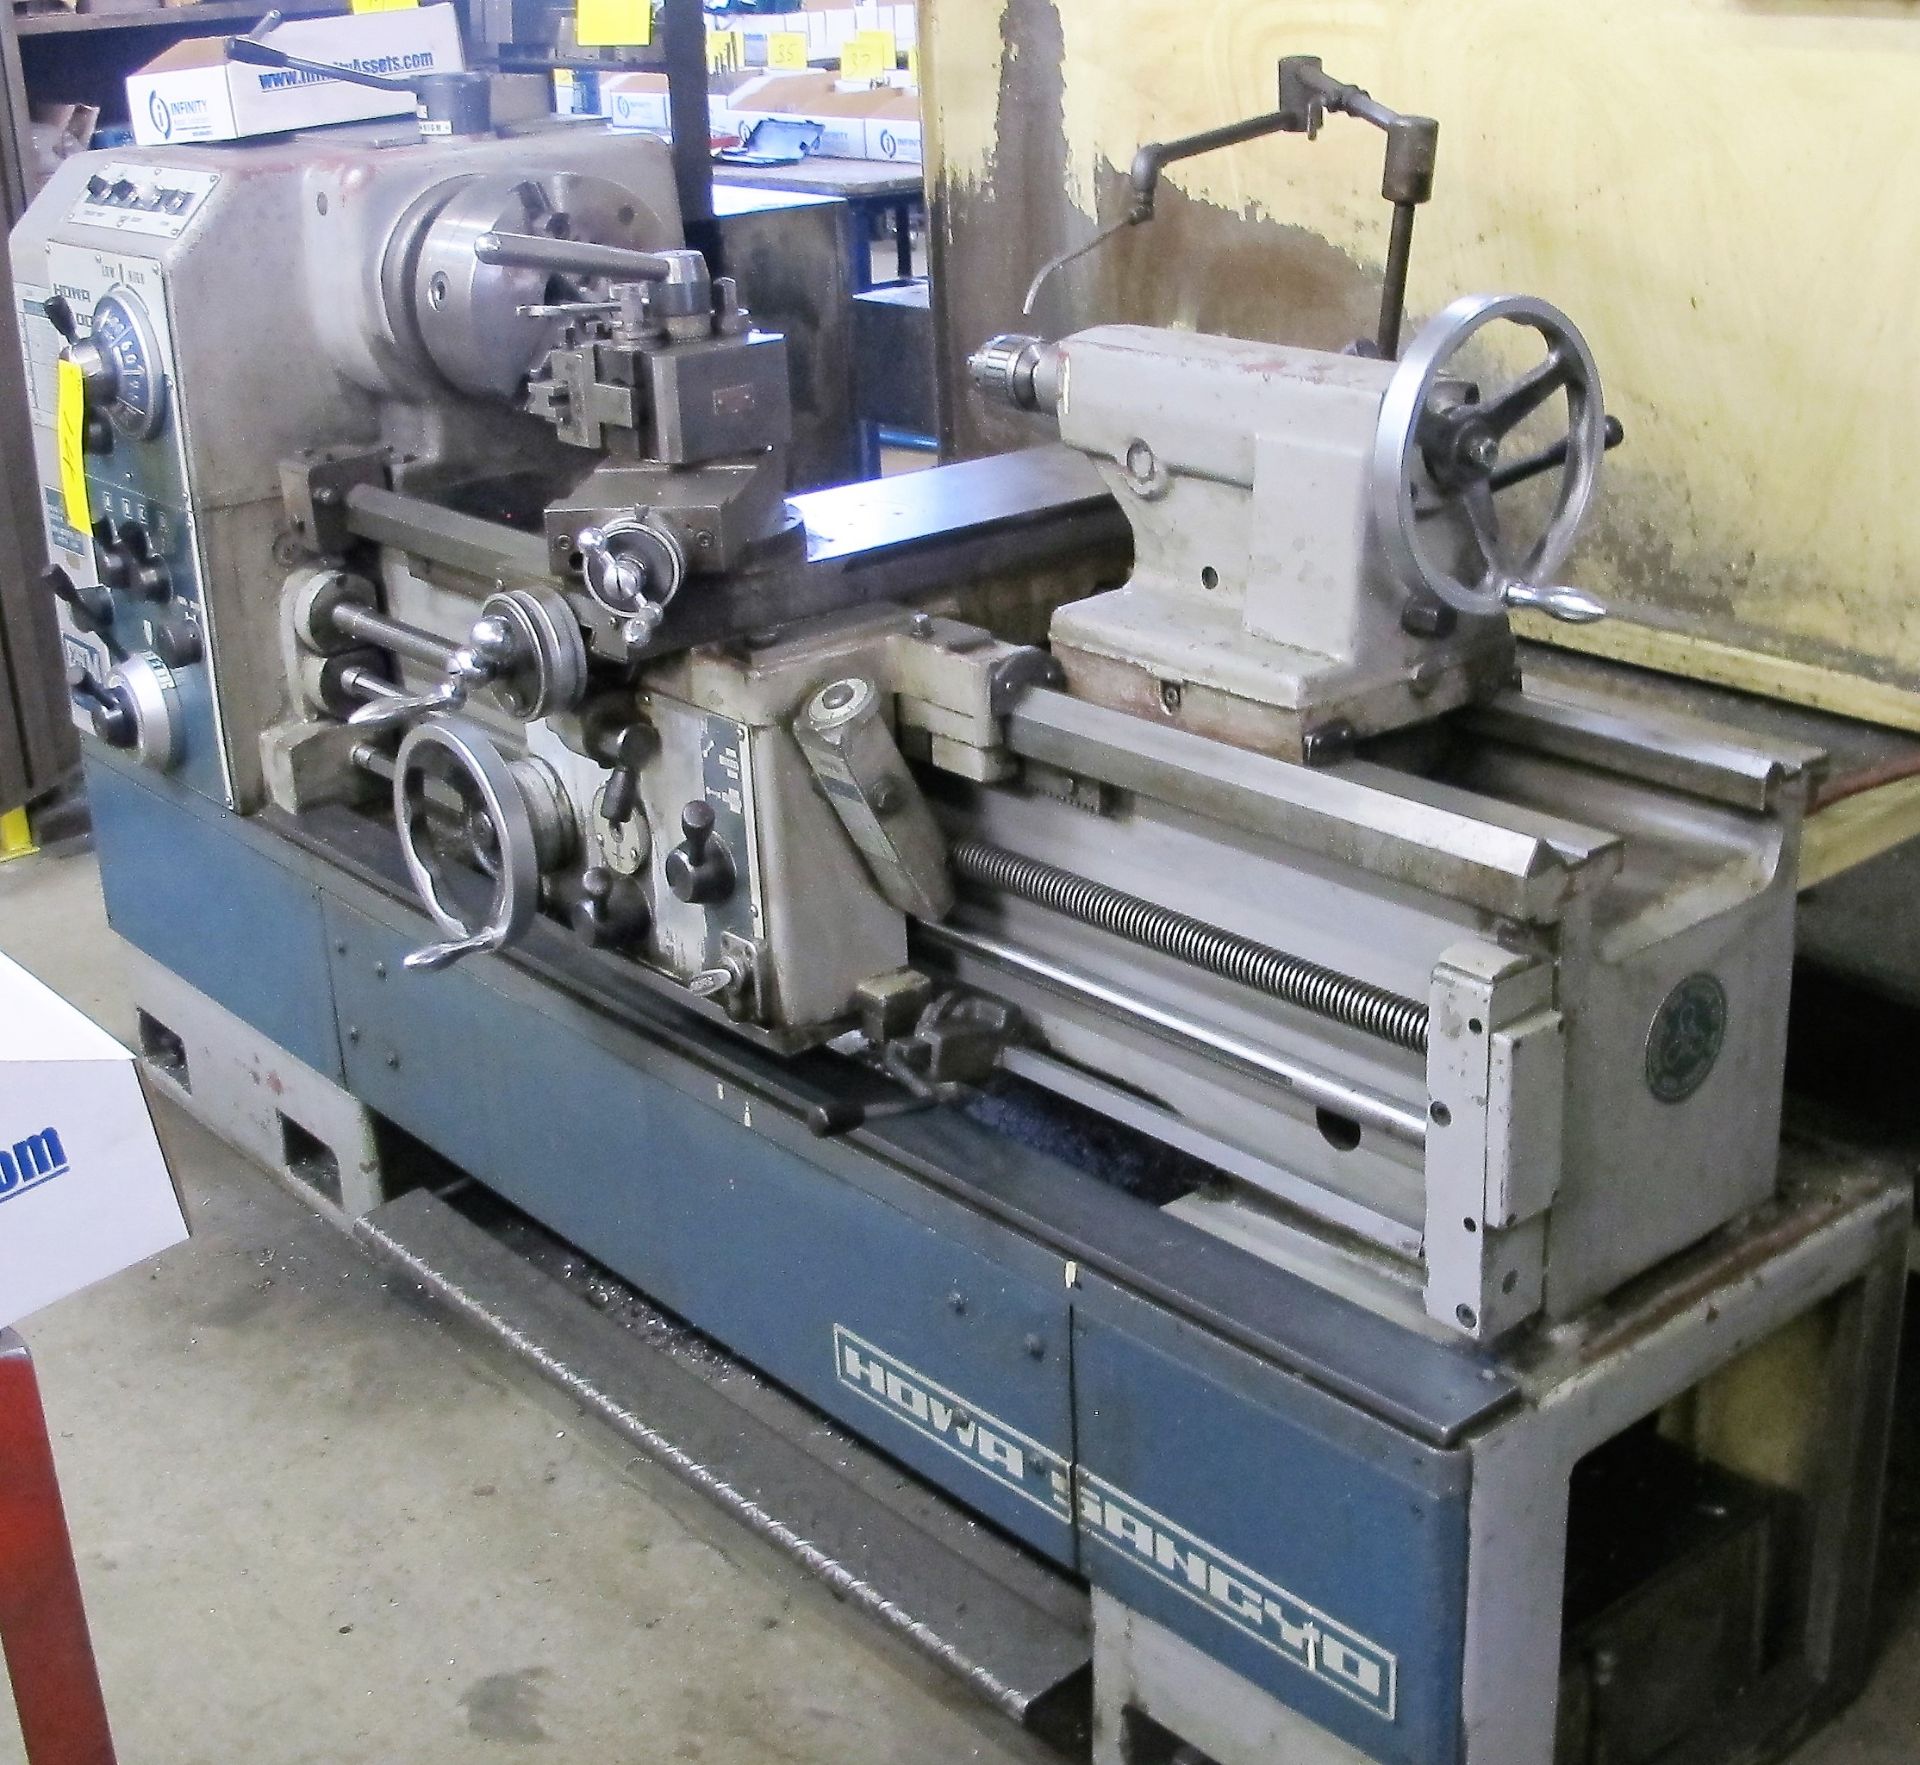 HOWA SANGYO 1000 ENGINE LATHE, S/N 10409, 9" 3-JAW CHUCK, 20" SWING, 54" BED, TAILSTOCK, TOOL - Image 3 of 9